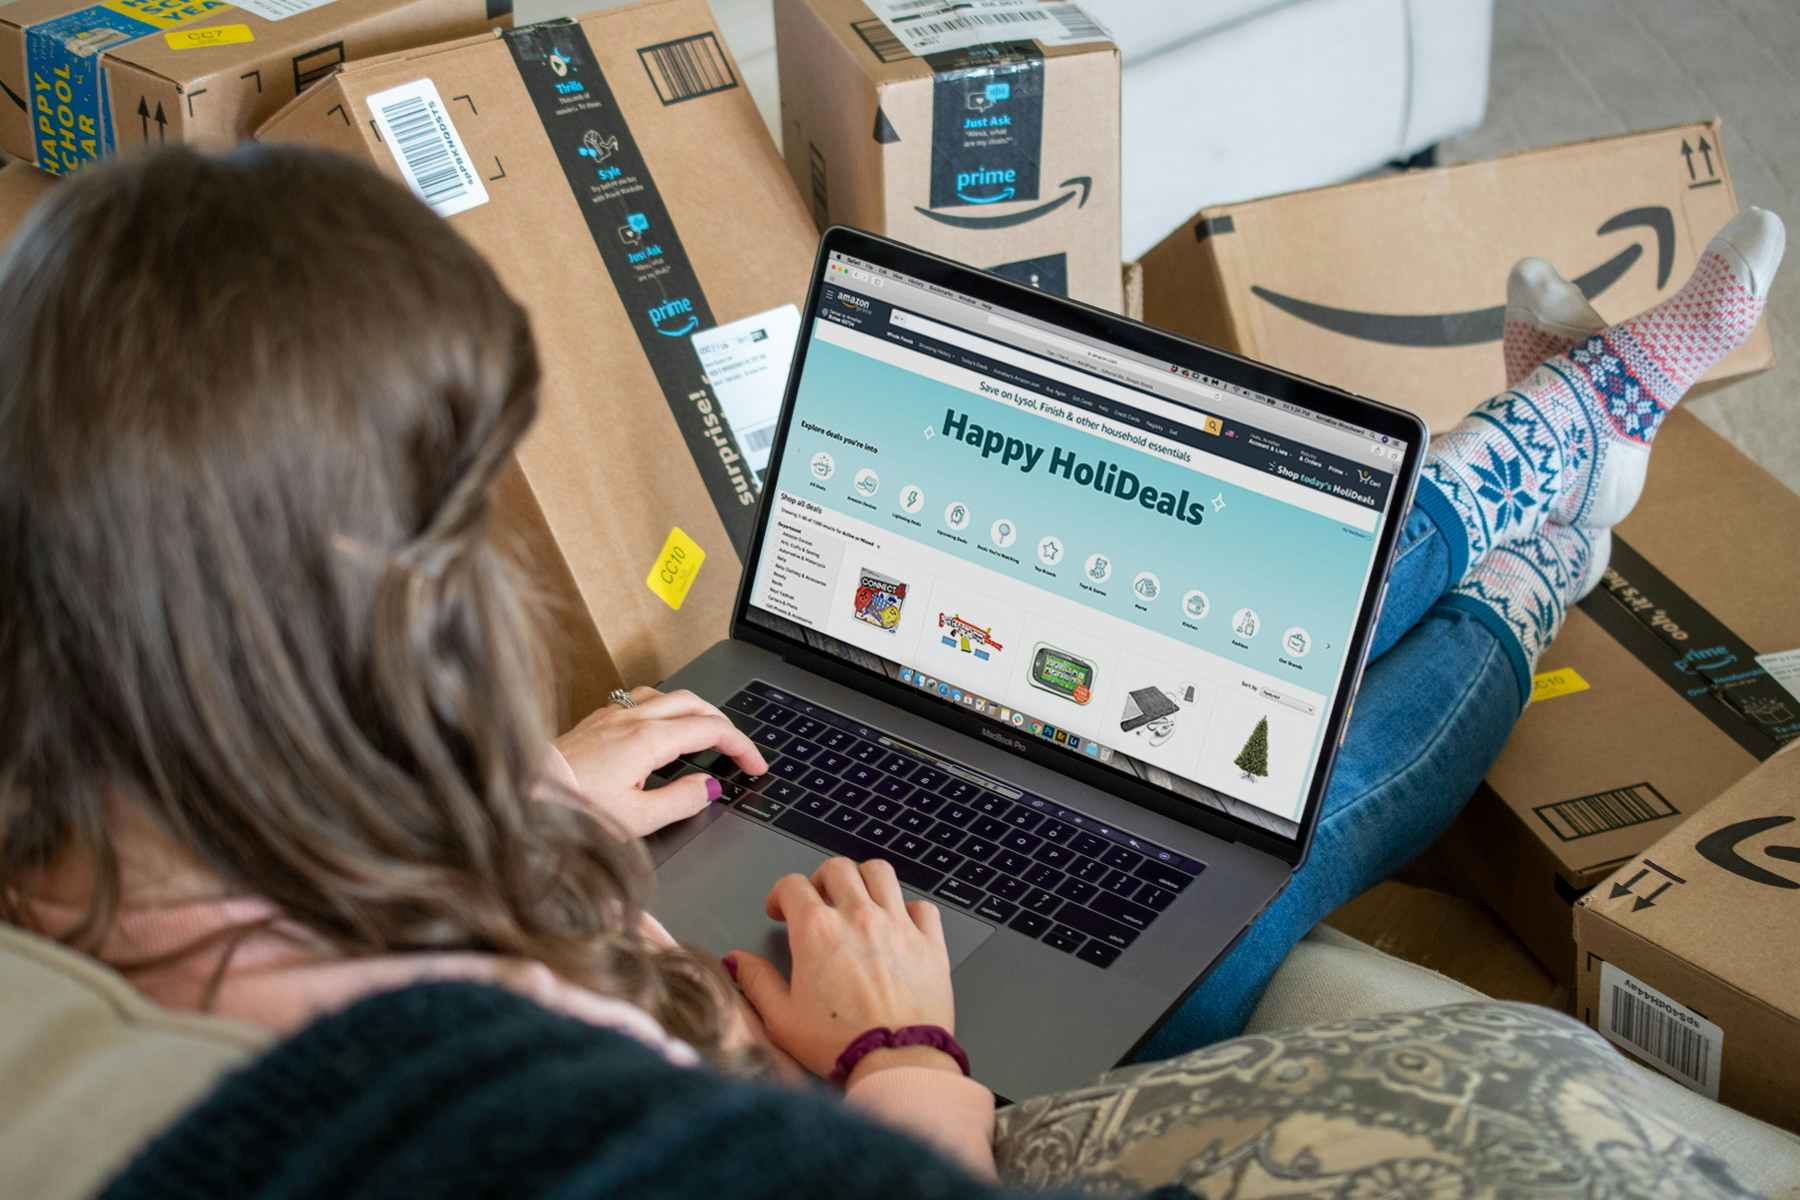 A woman shopping on Amazon on a laptop surrounded by Amazon boxes